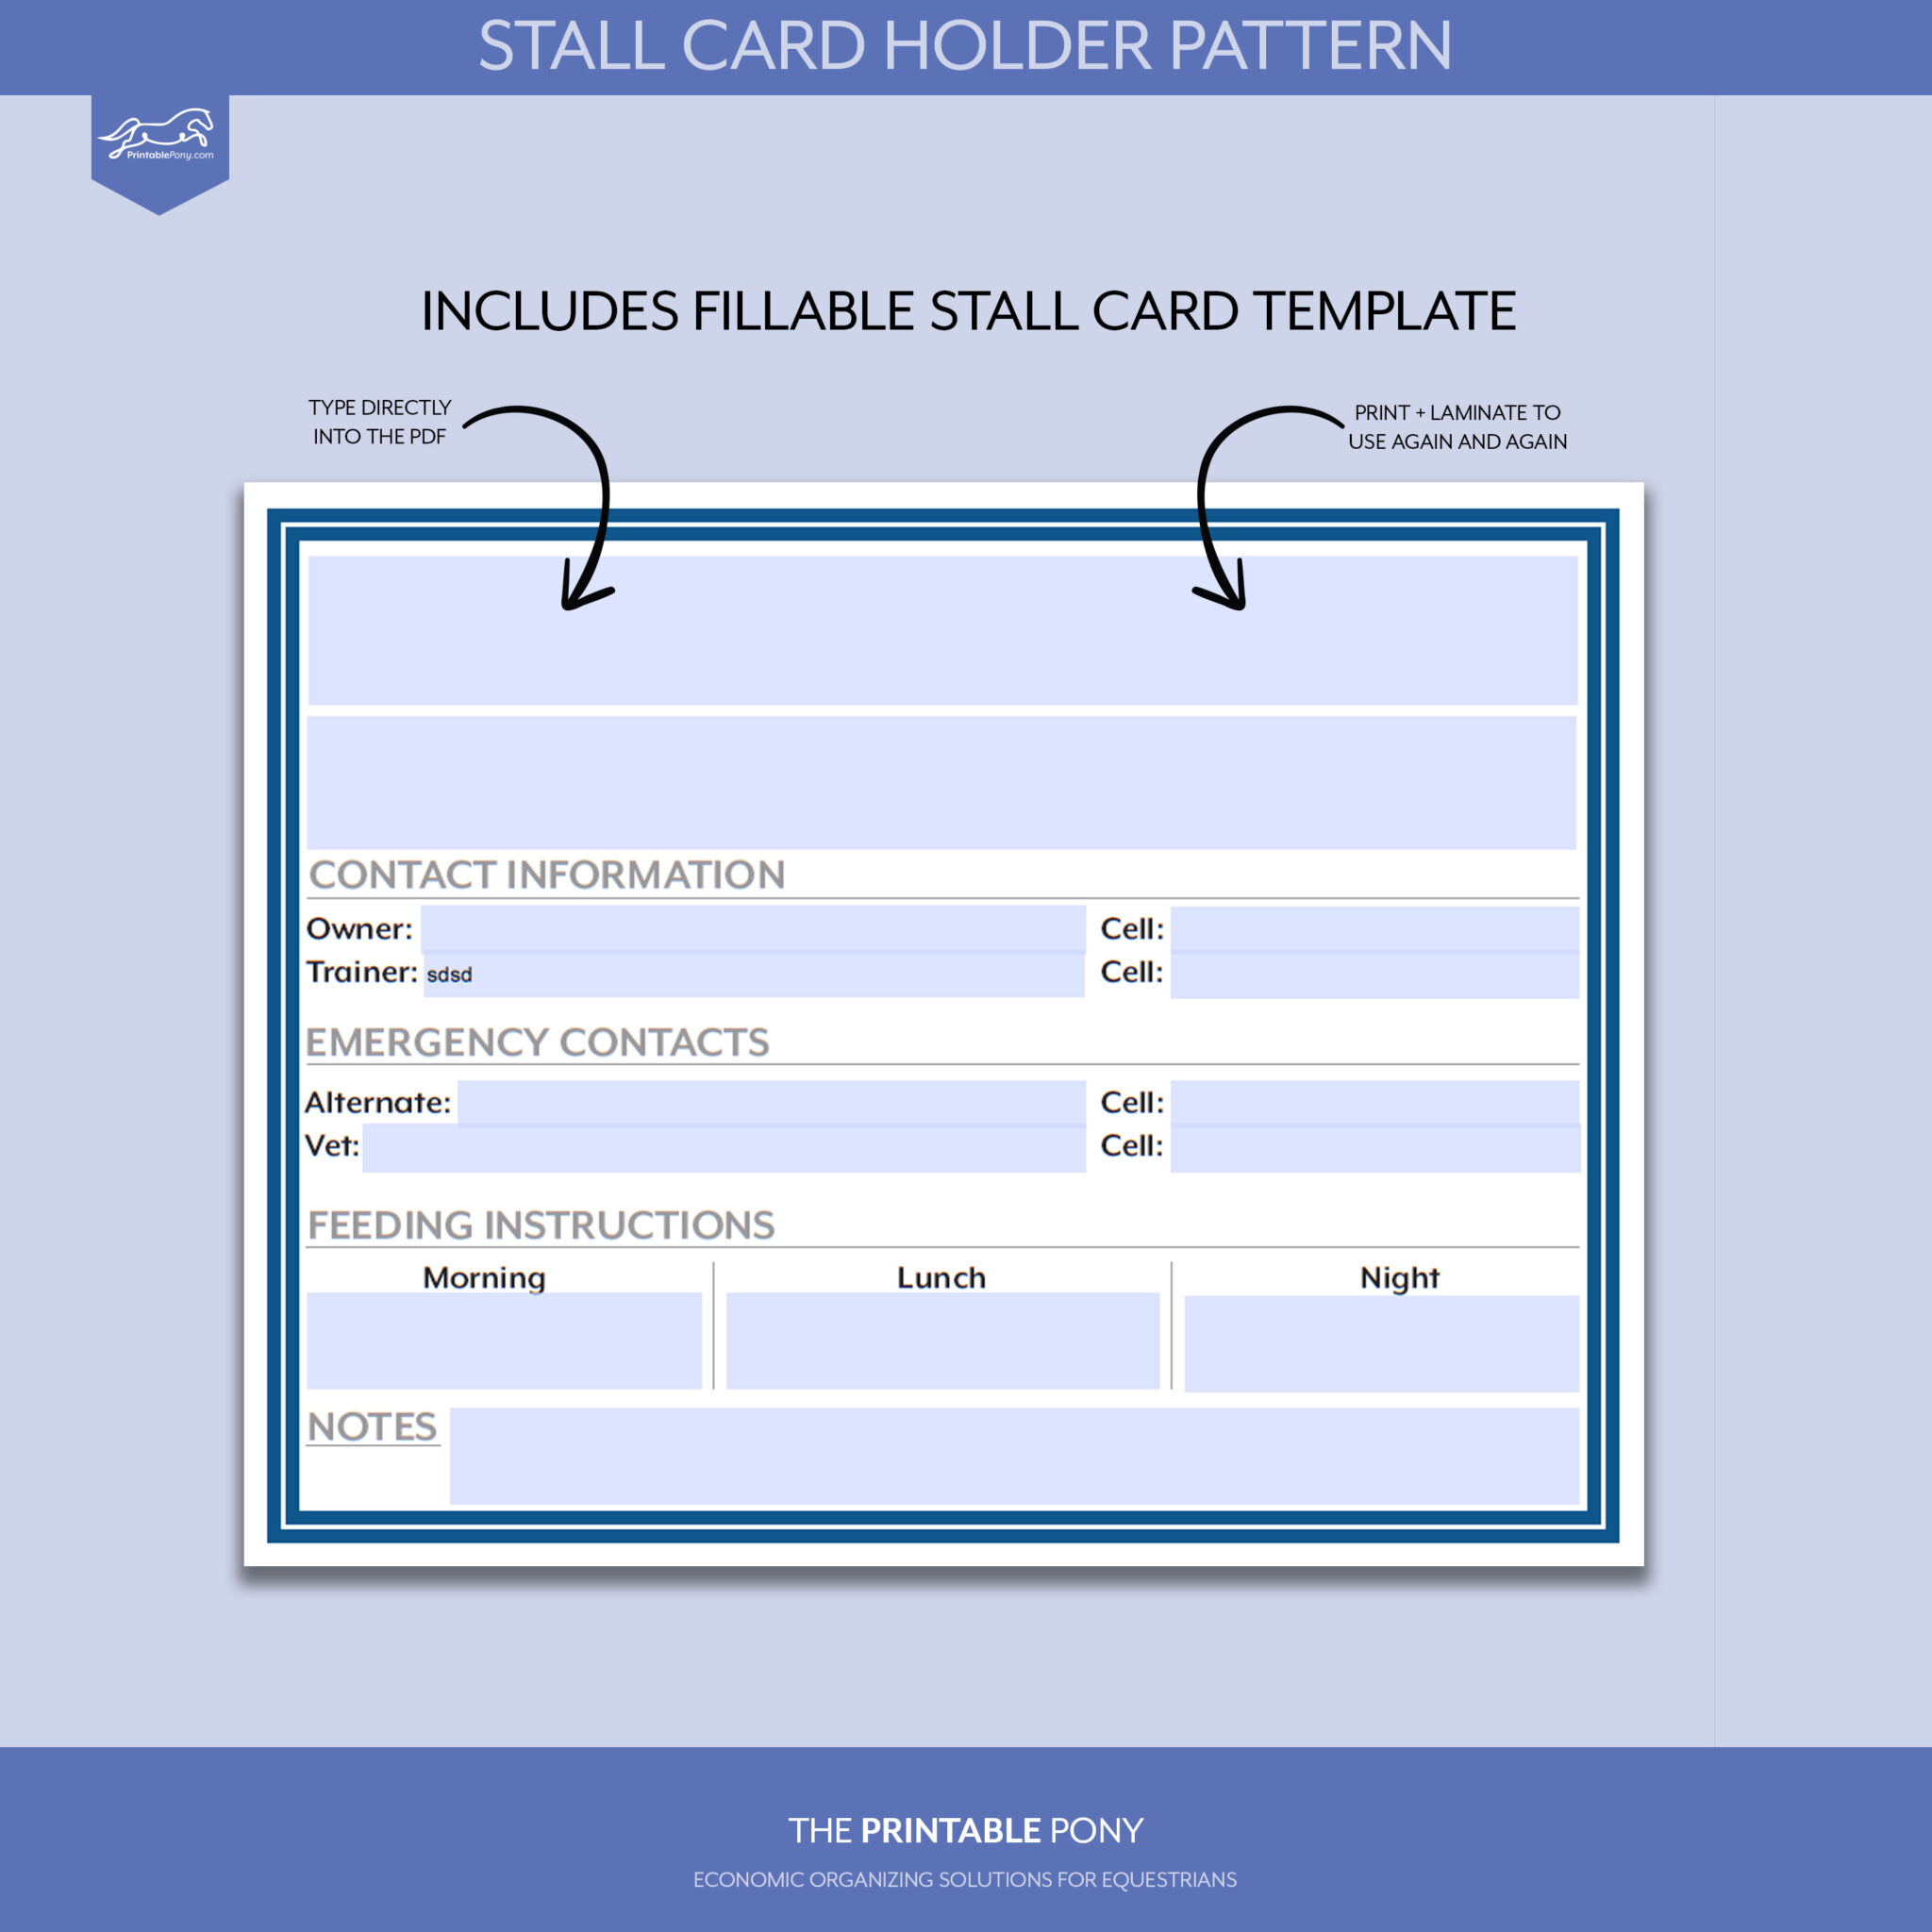 Horse Stall Card Template